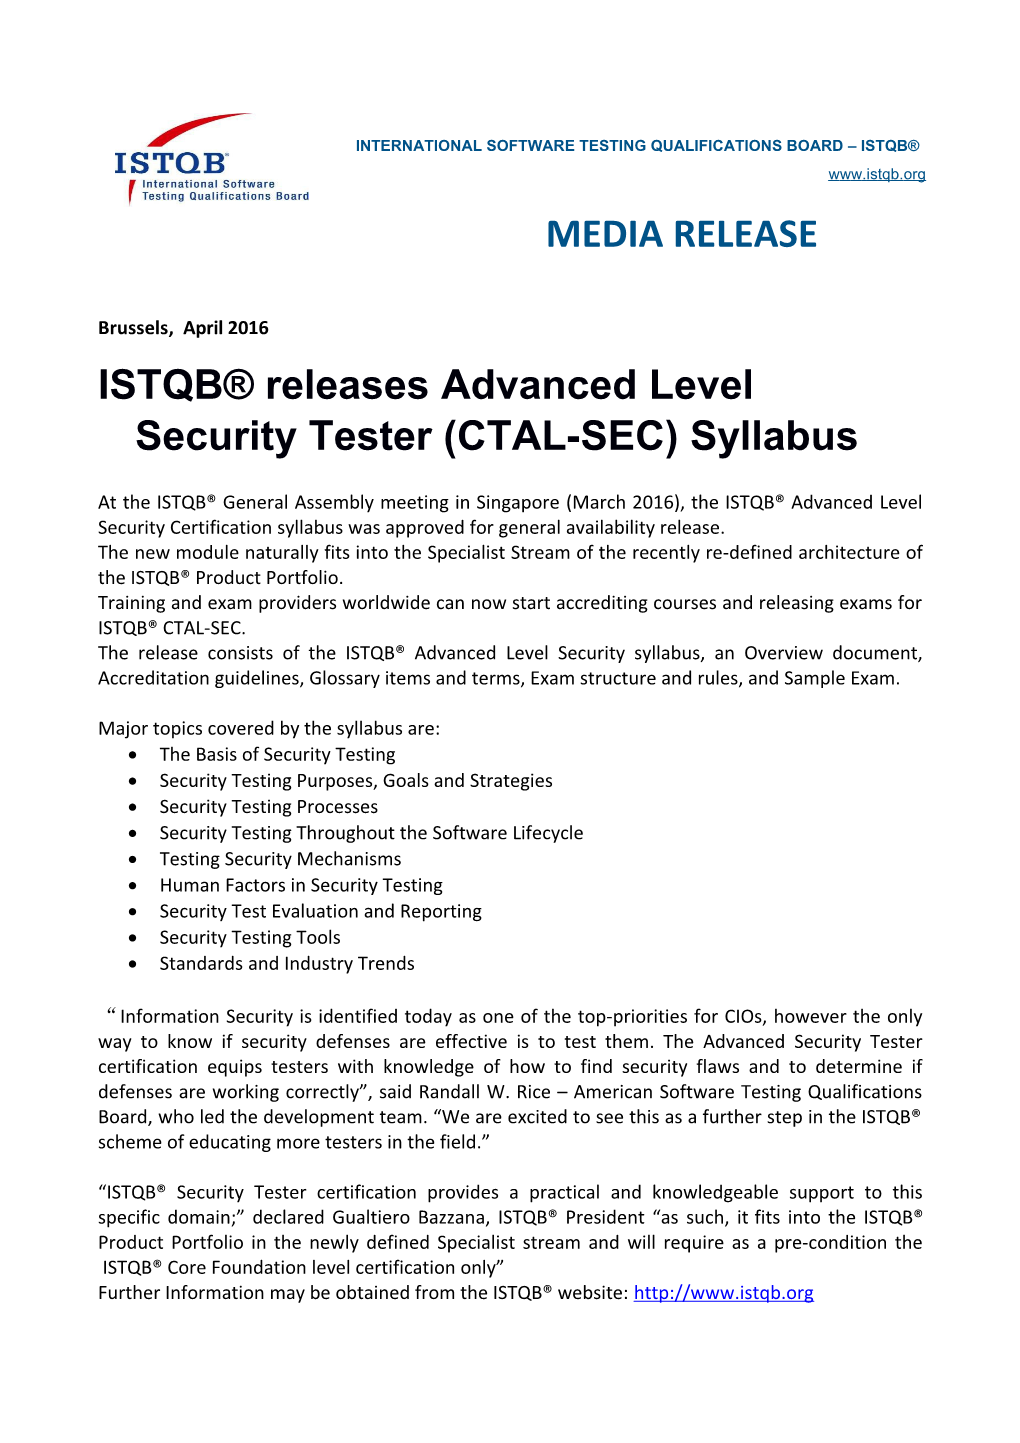 ISTQB Releases Advanced Level Security Tester (CTAL-SEC) Syllabus